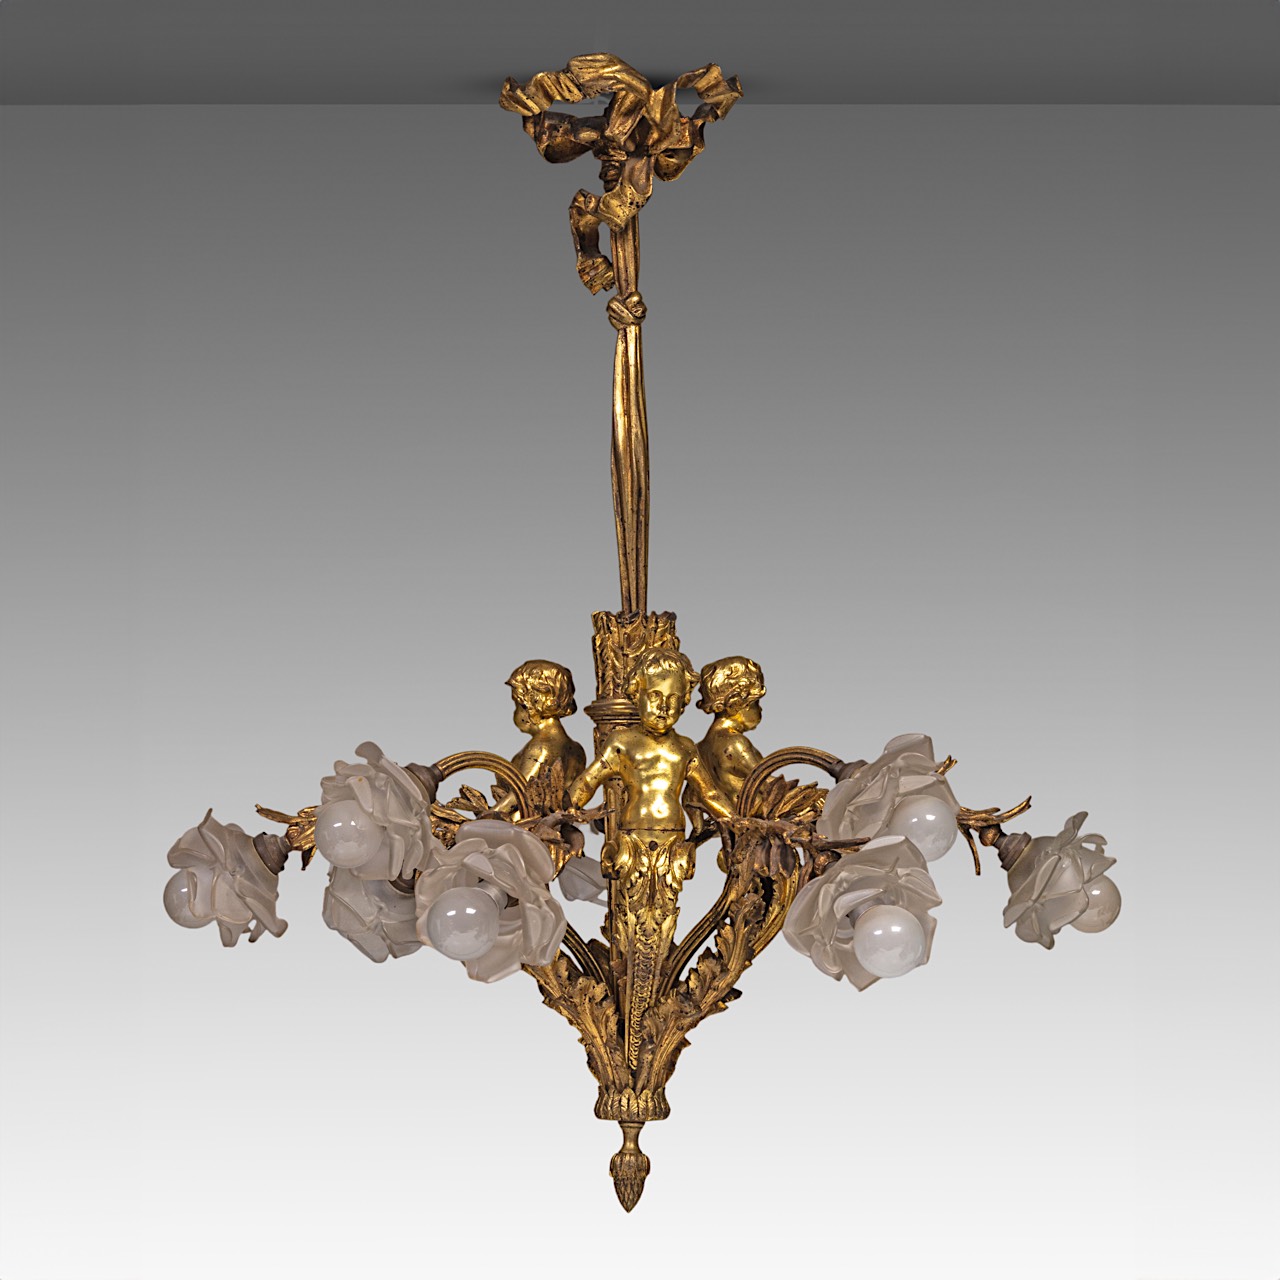 A Neoclassical gilt bronze chandelier, decorated with putti, H 80 cm - Image 4 of 7